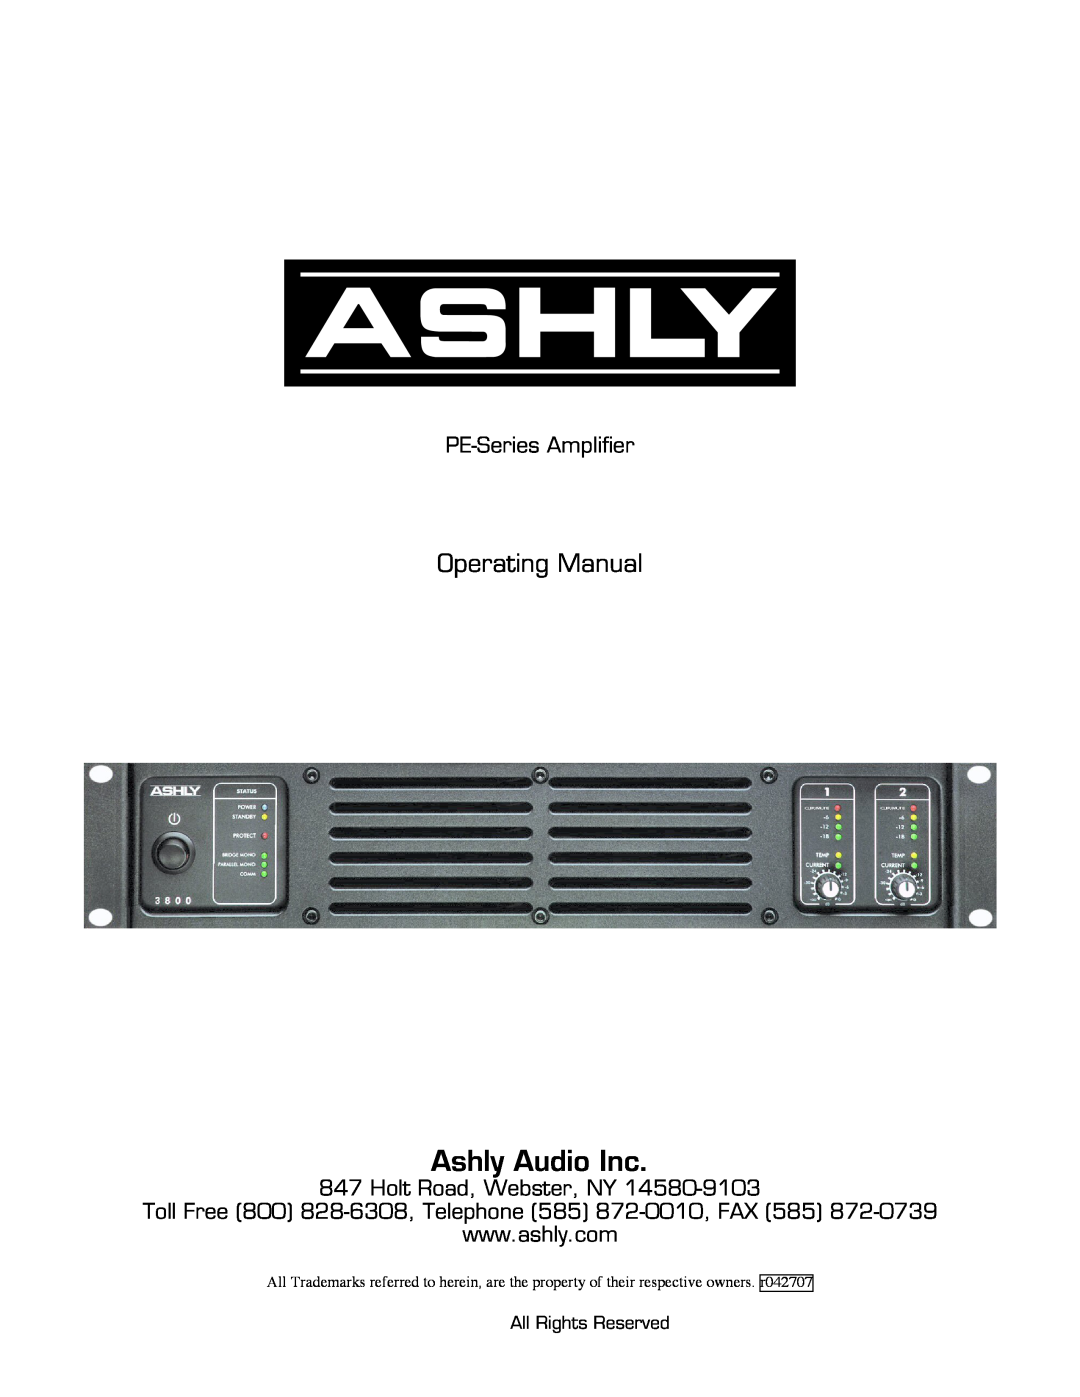 Ashly PE Series manual Operating Manual, PE-SeriesAmplifier, Holt Road, Webster, NY, Ashly Audio Inc, All Rights Reserved 